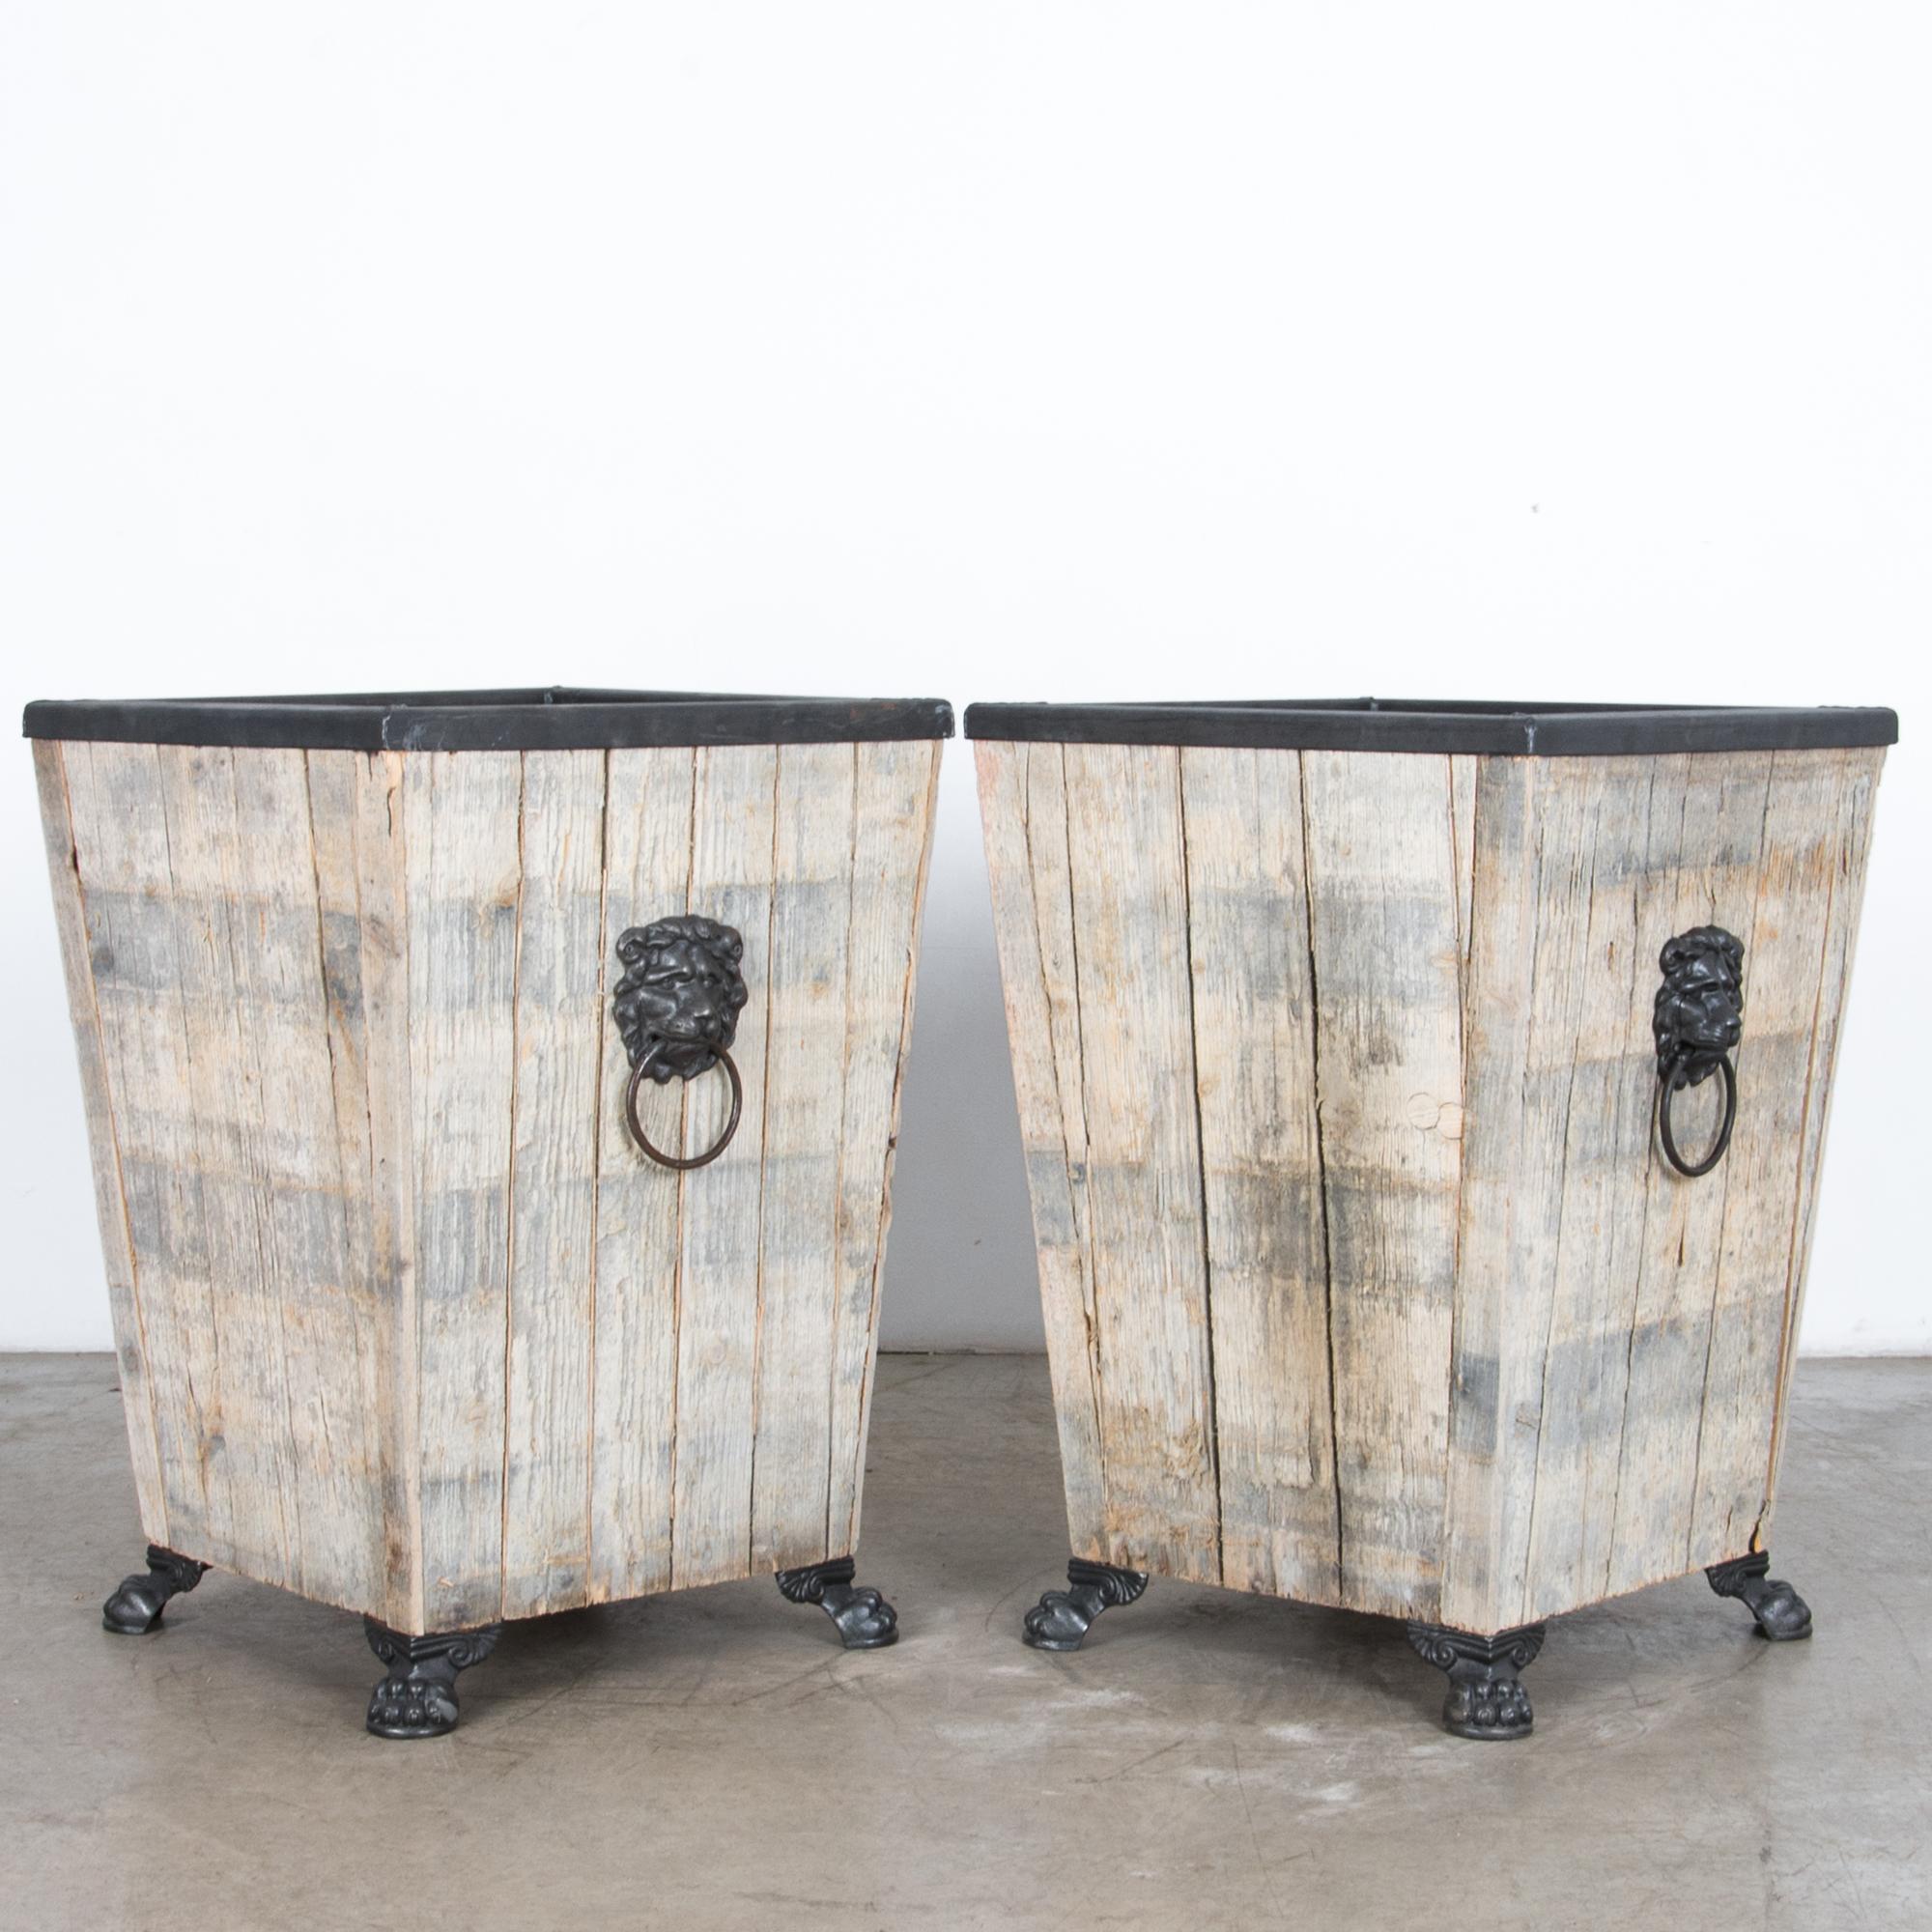 A pair of sturdy wooden garden planter produced in our atelier. The cool grey finish compliments textured softwood and polished cast iron. With a hint of traditional ornament, a cast iron elements elevate the piece with practical feet and handles.